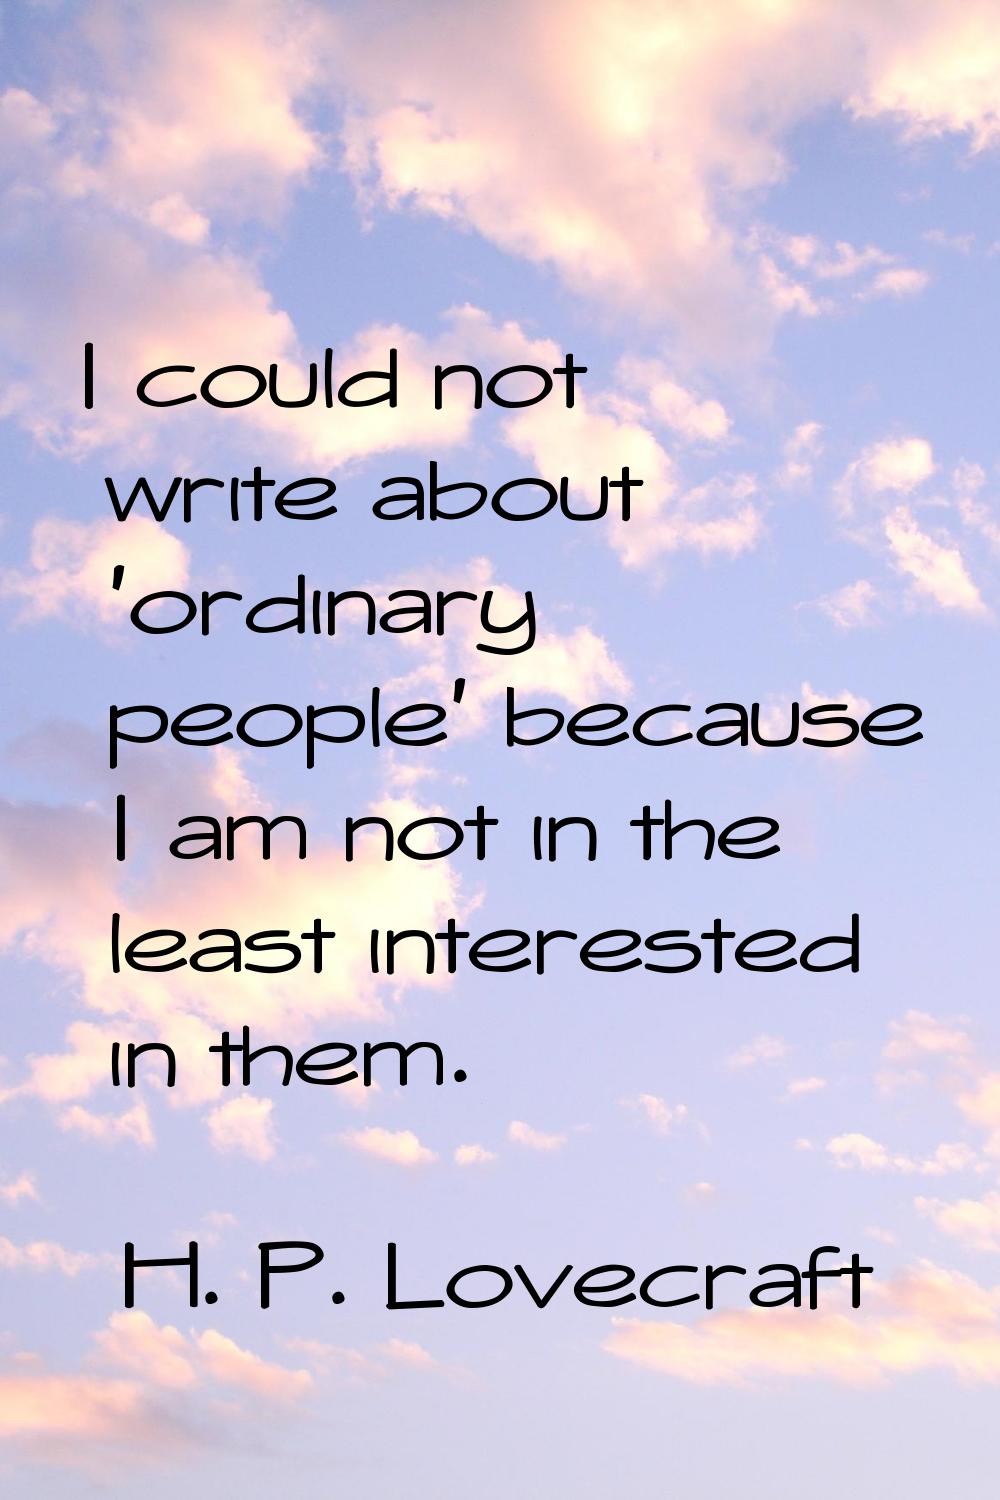 I could not write about 'ordinary people' because I am not in the least interested in them.